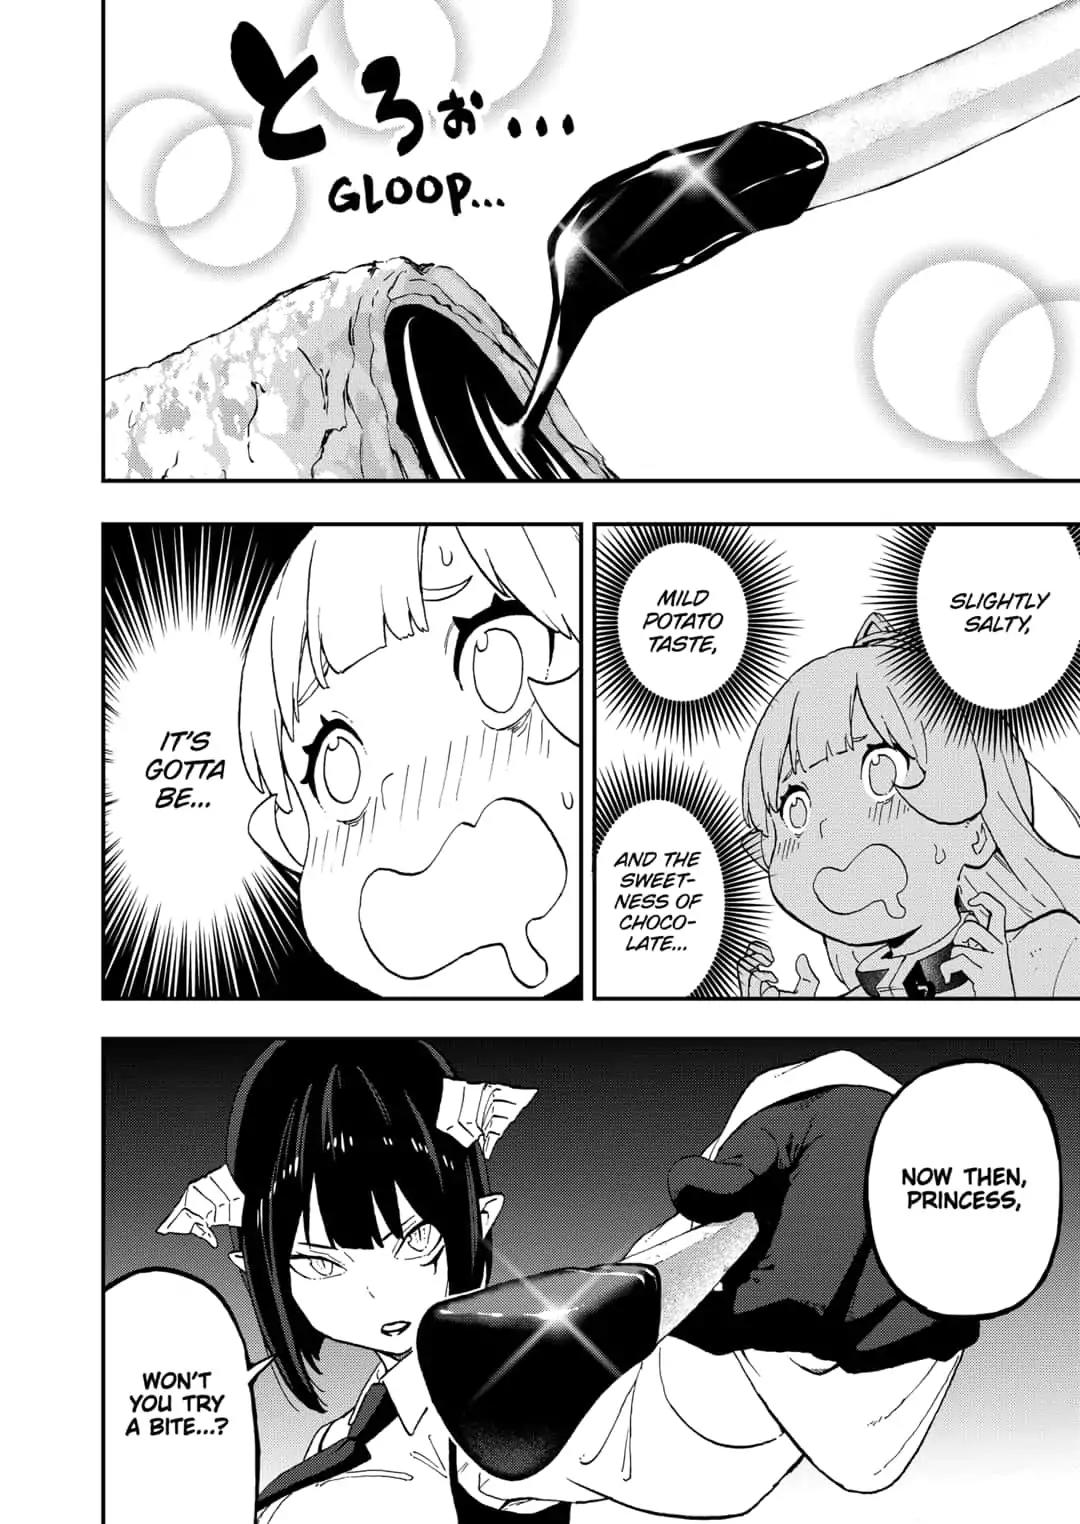 It's Time for "Interrogation," Princess! Chapter 32